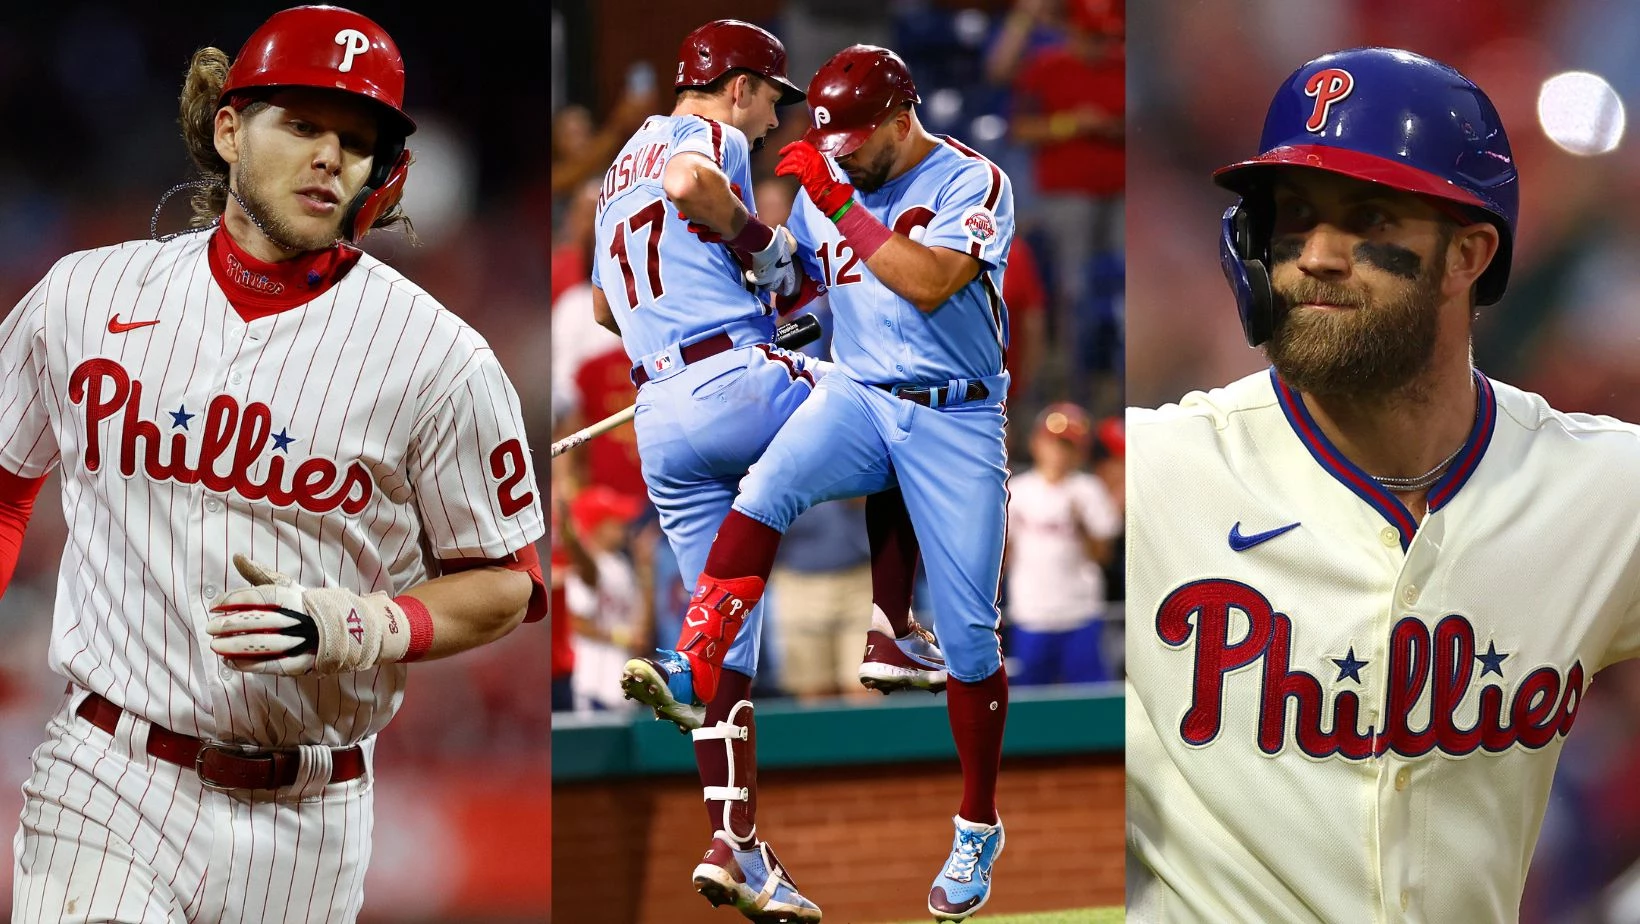 phillies uniforms red